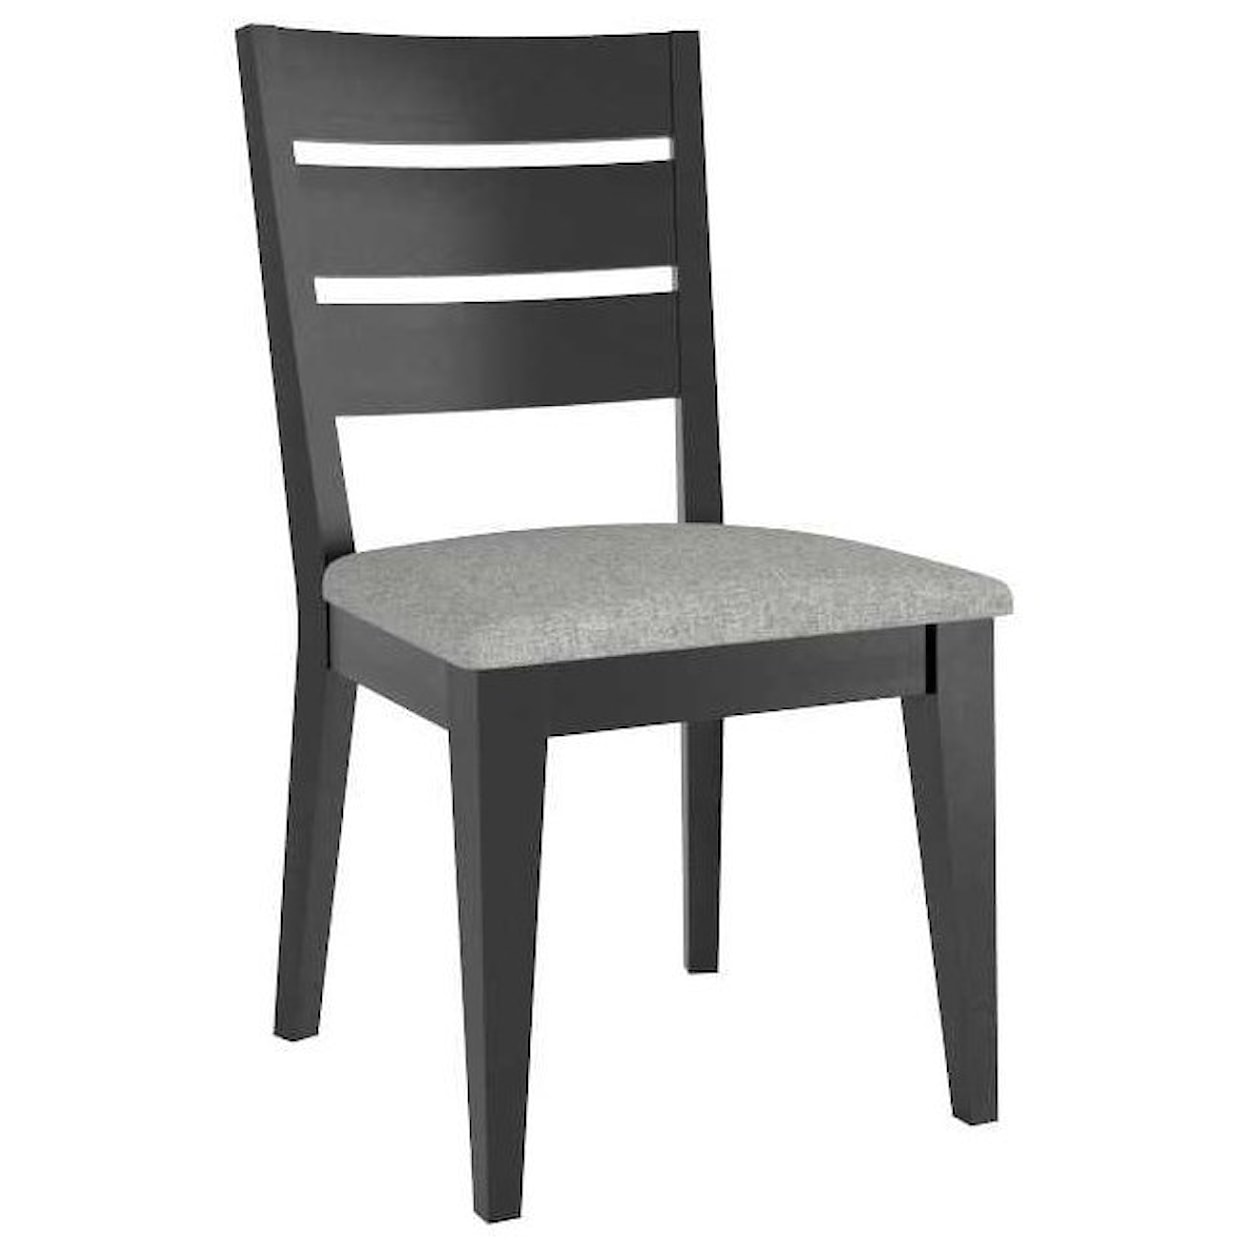 Canadel Gourmet Customizable Ladder Back Side Chair